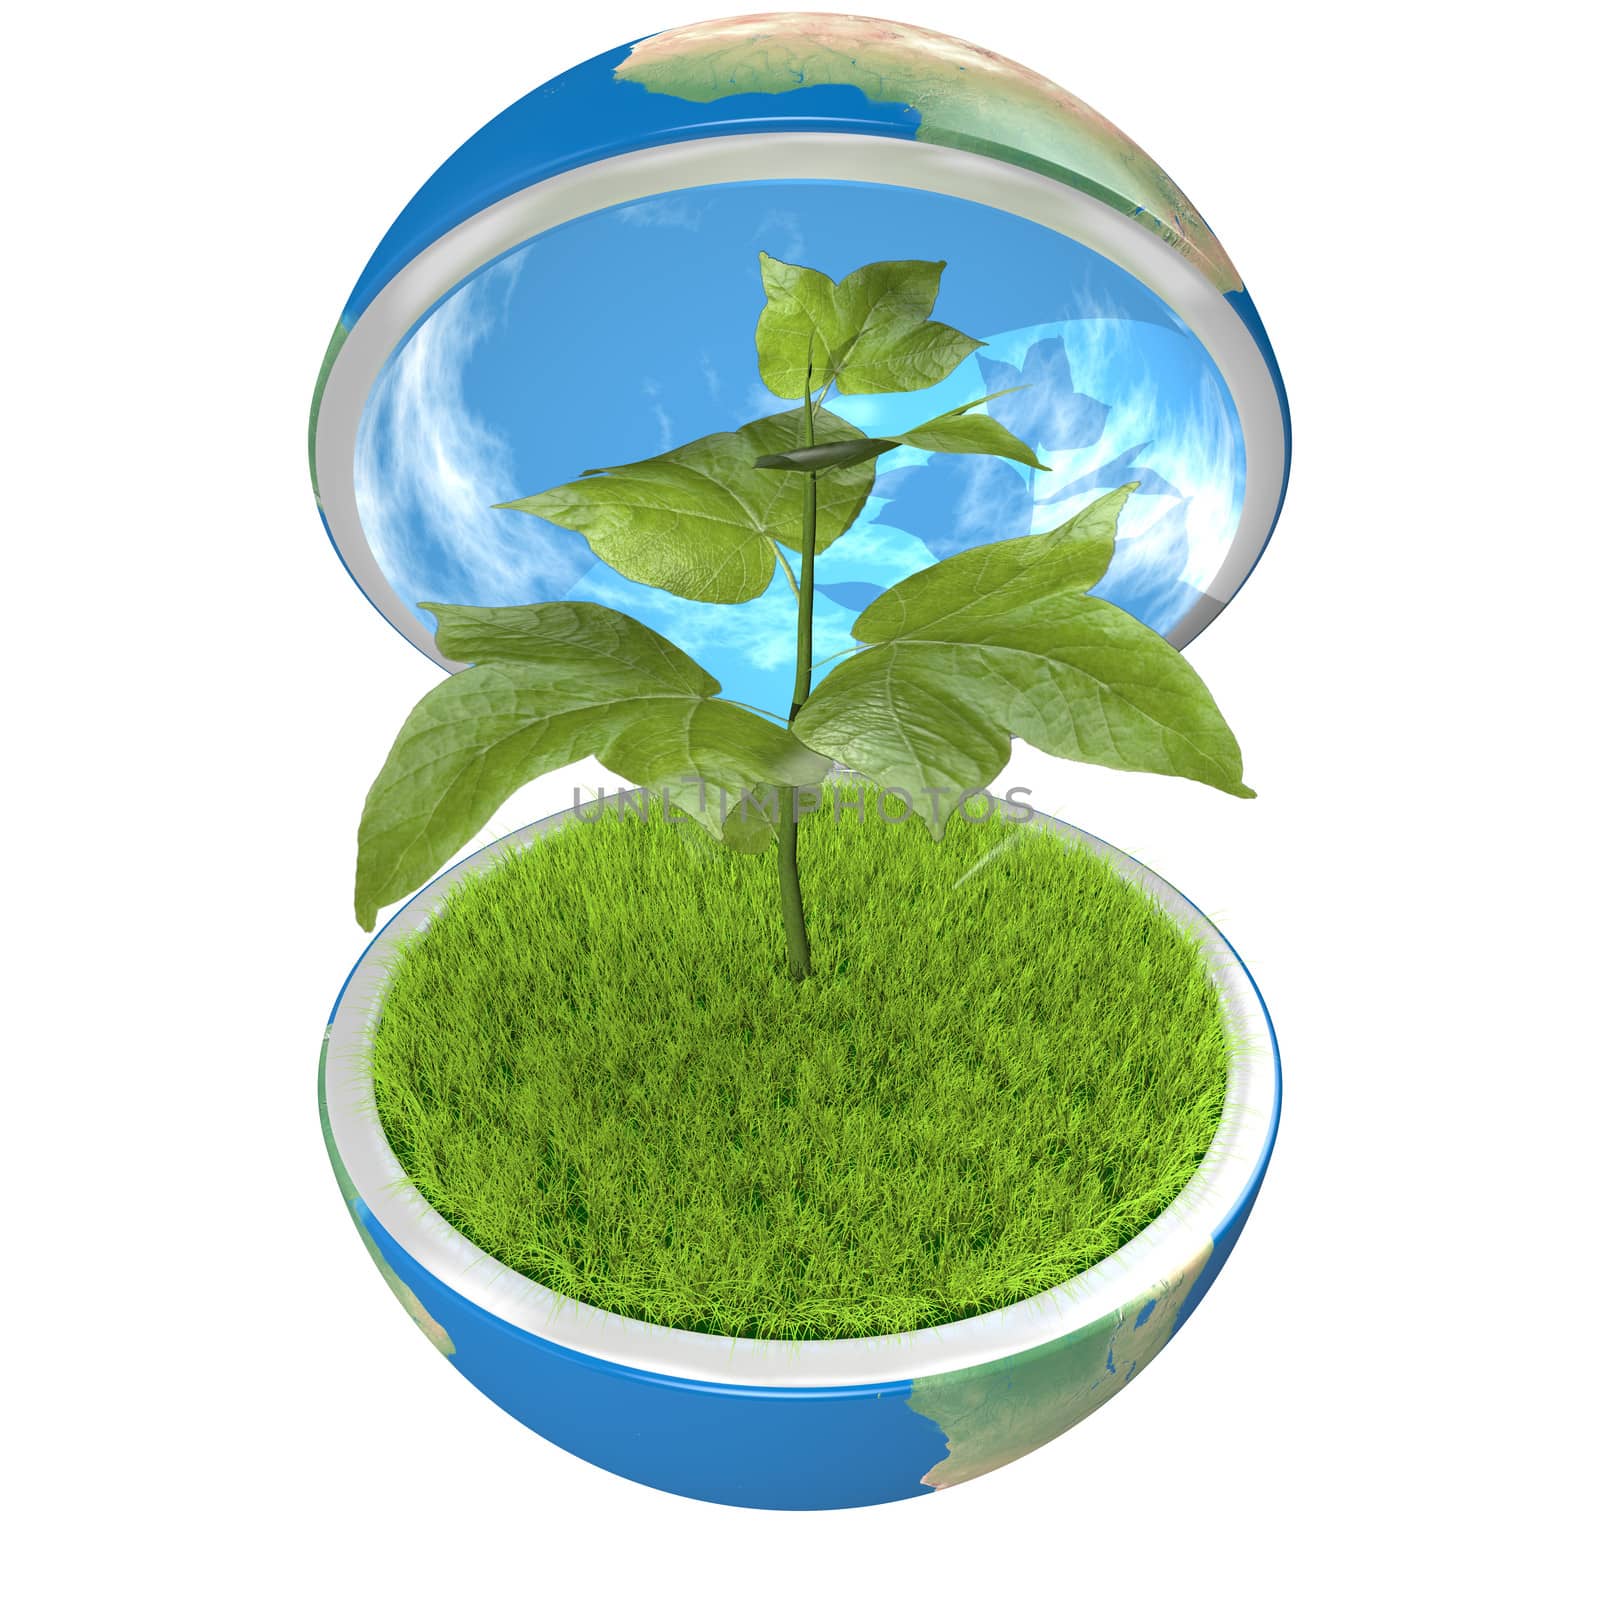 Small plant growing inside opened planet Earth, isolated on white background, concept of ecology, symbol of new life. Elements of this image furnished by NASA